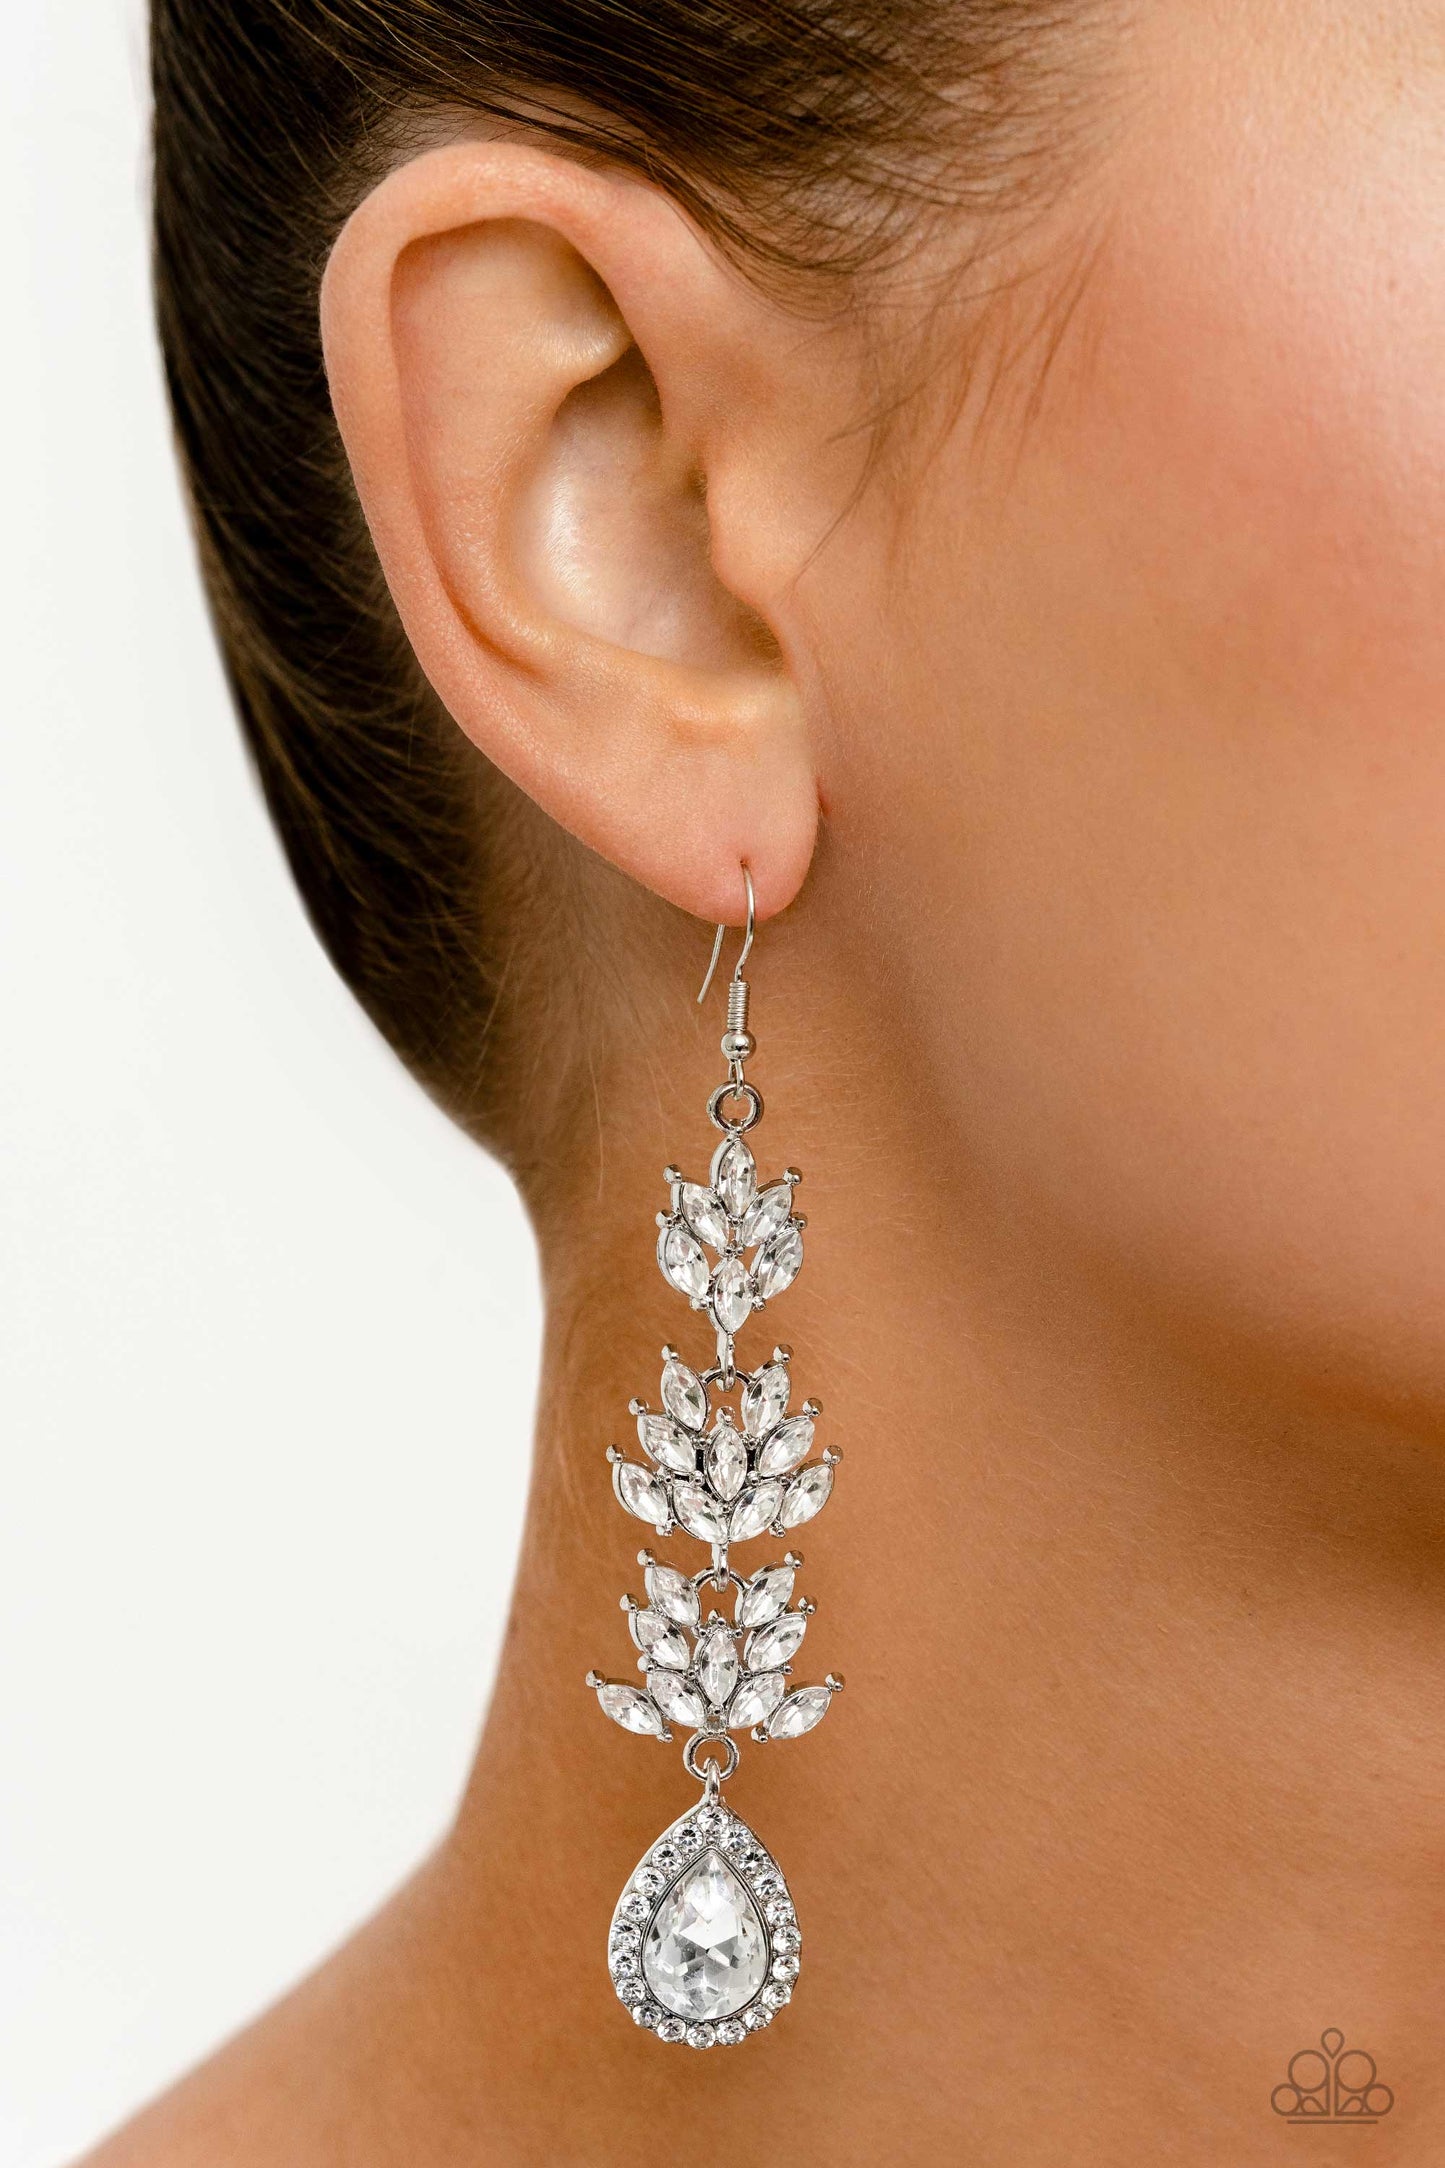 Water Lily Whimsy - White Earrings - Paparazzi Accessories